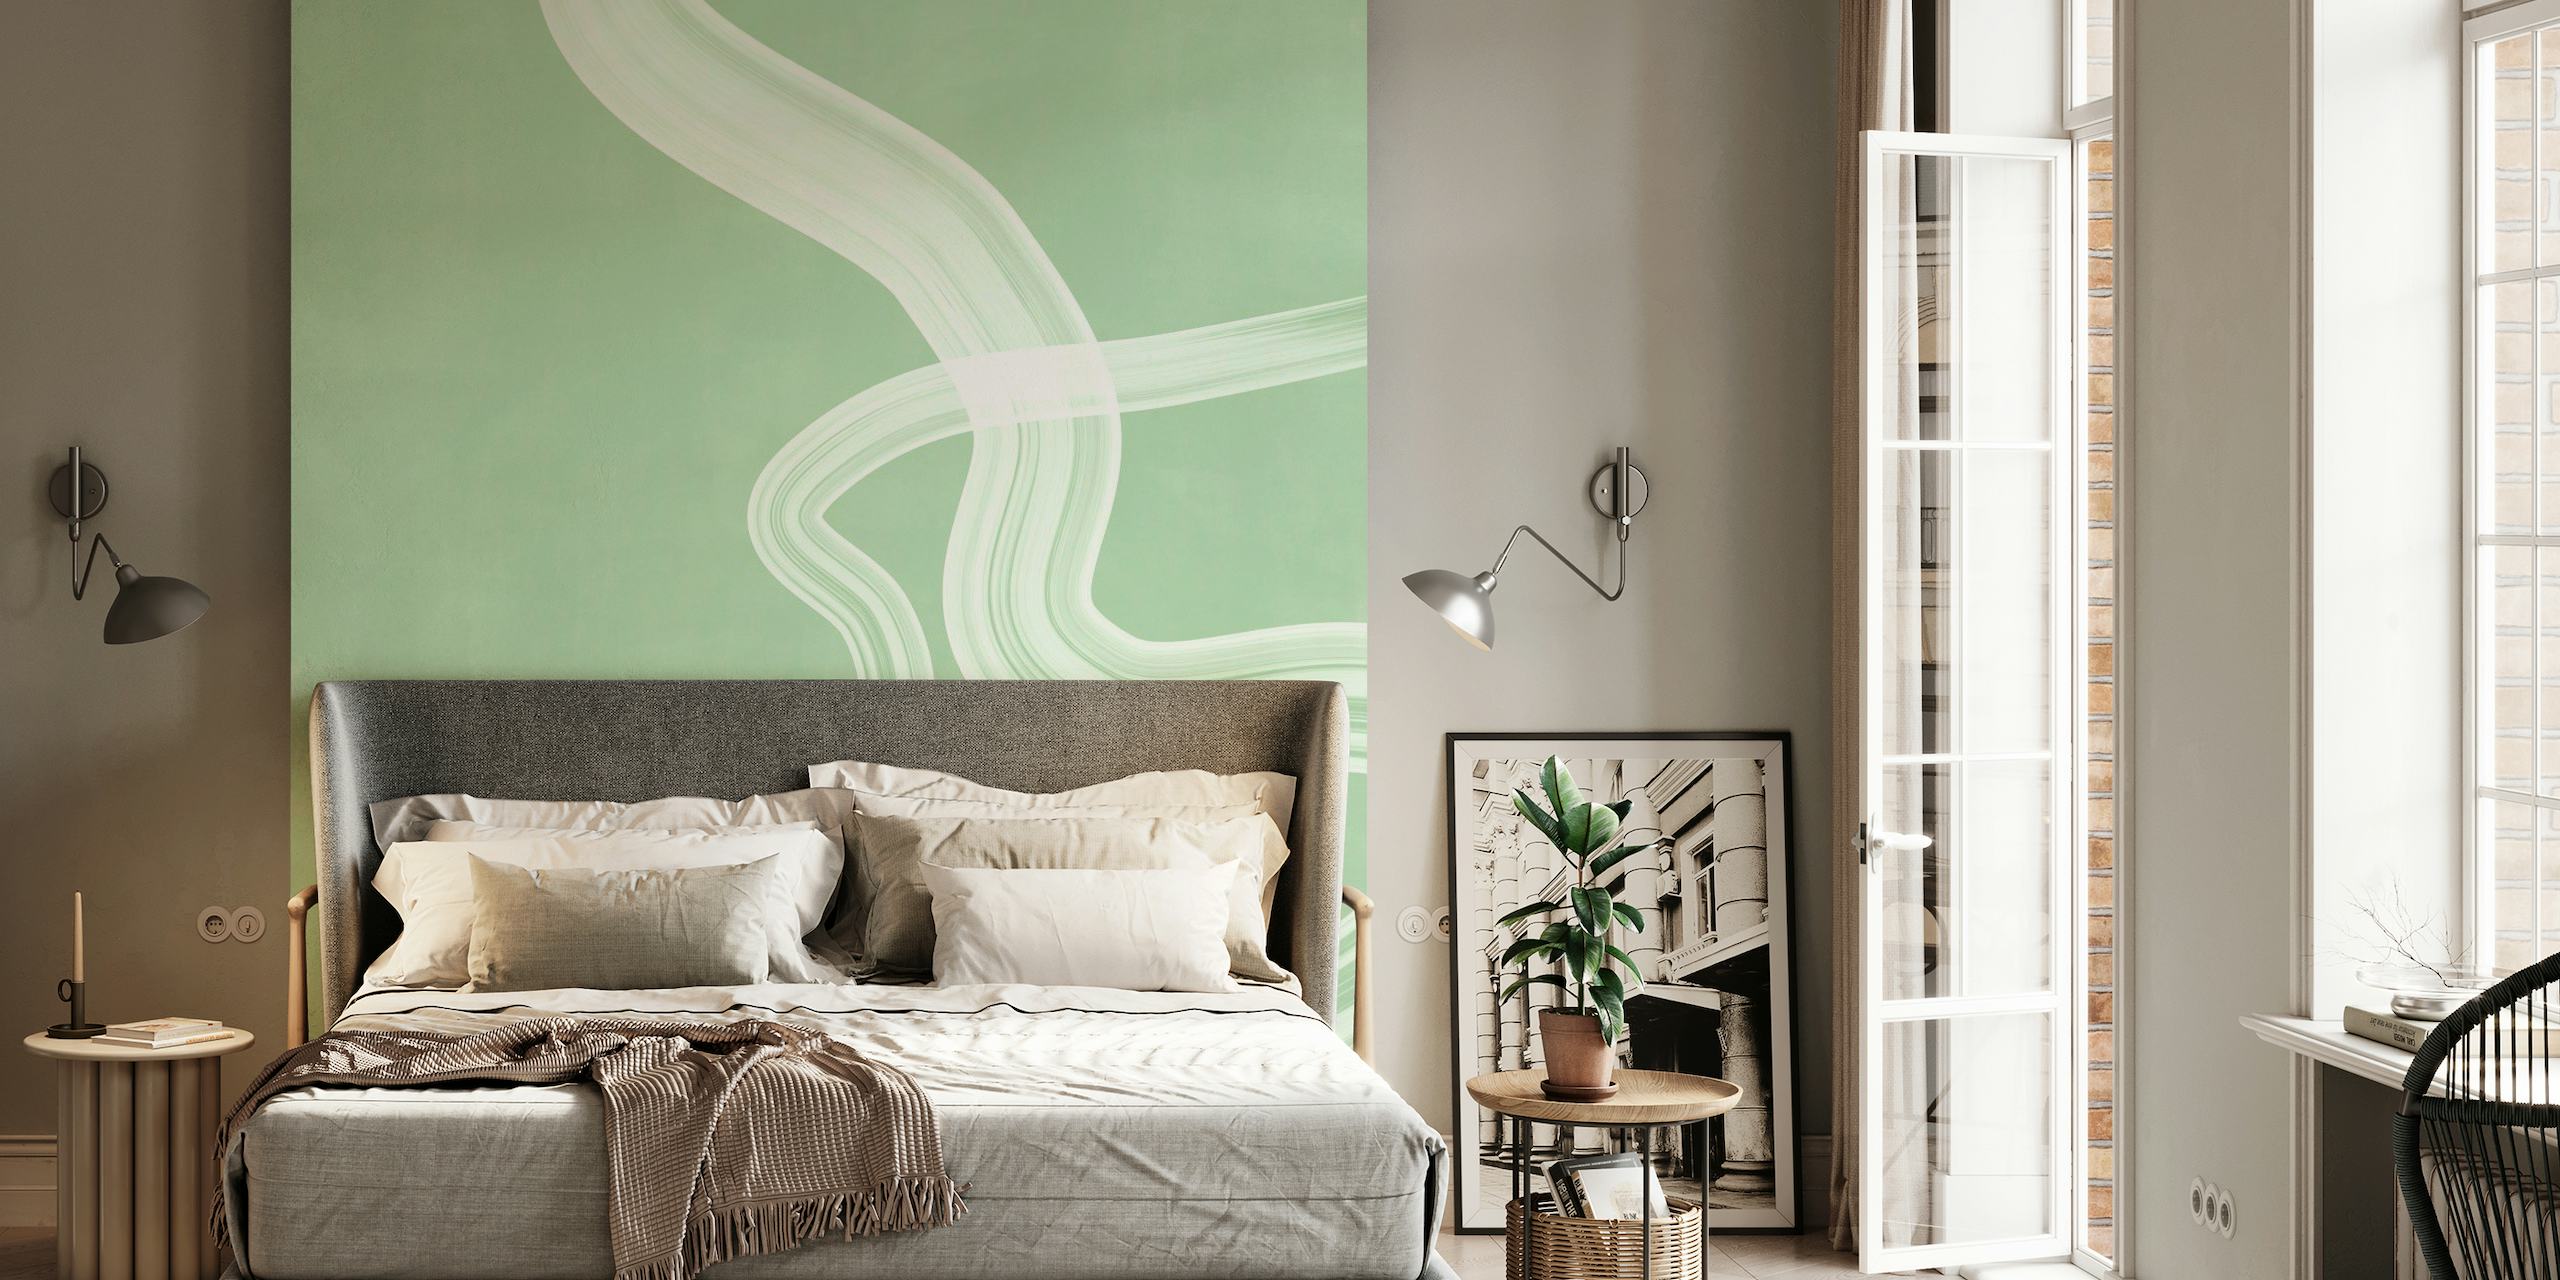 Soft green wall mural with abstract wavy lines design